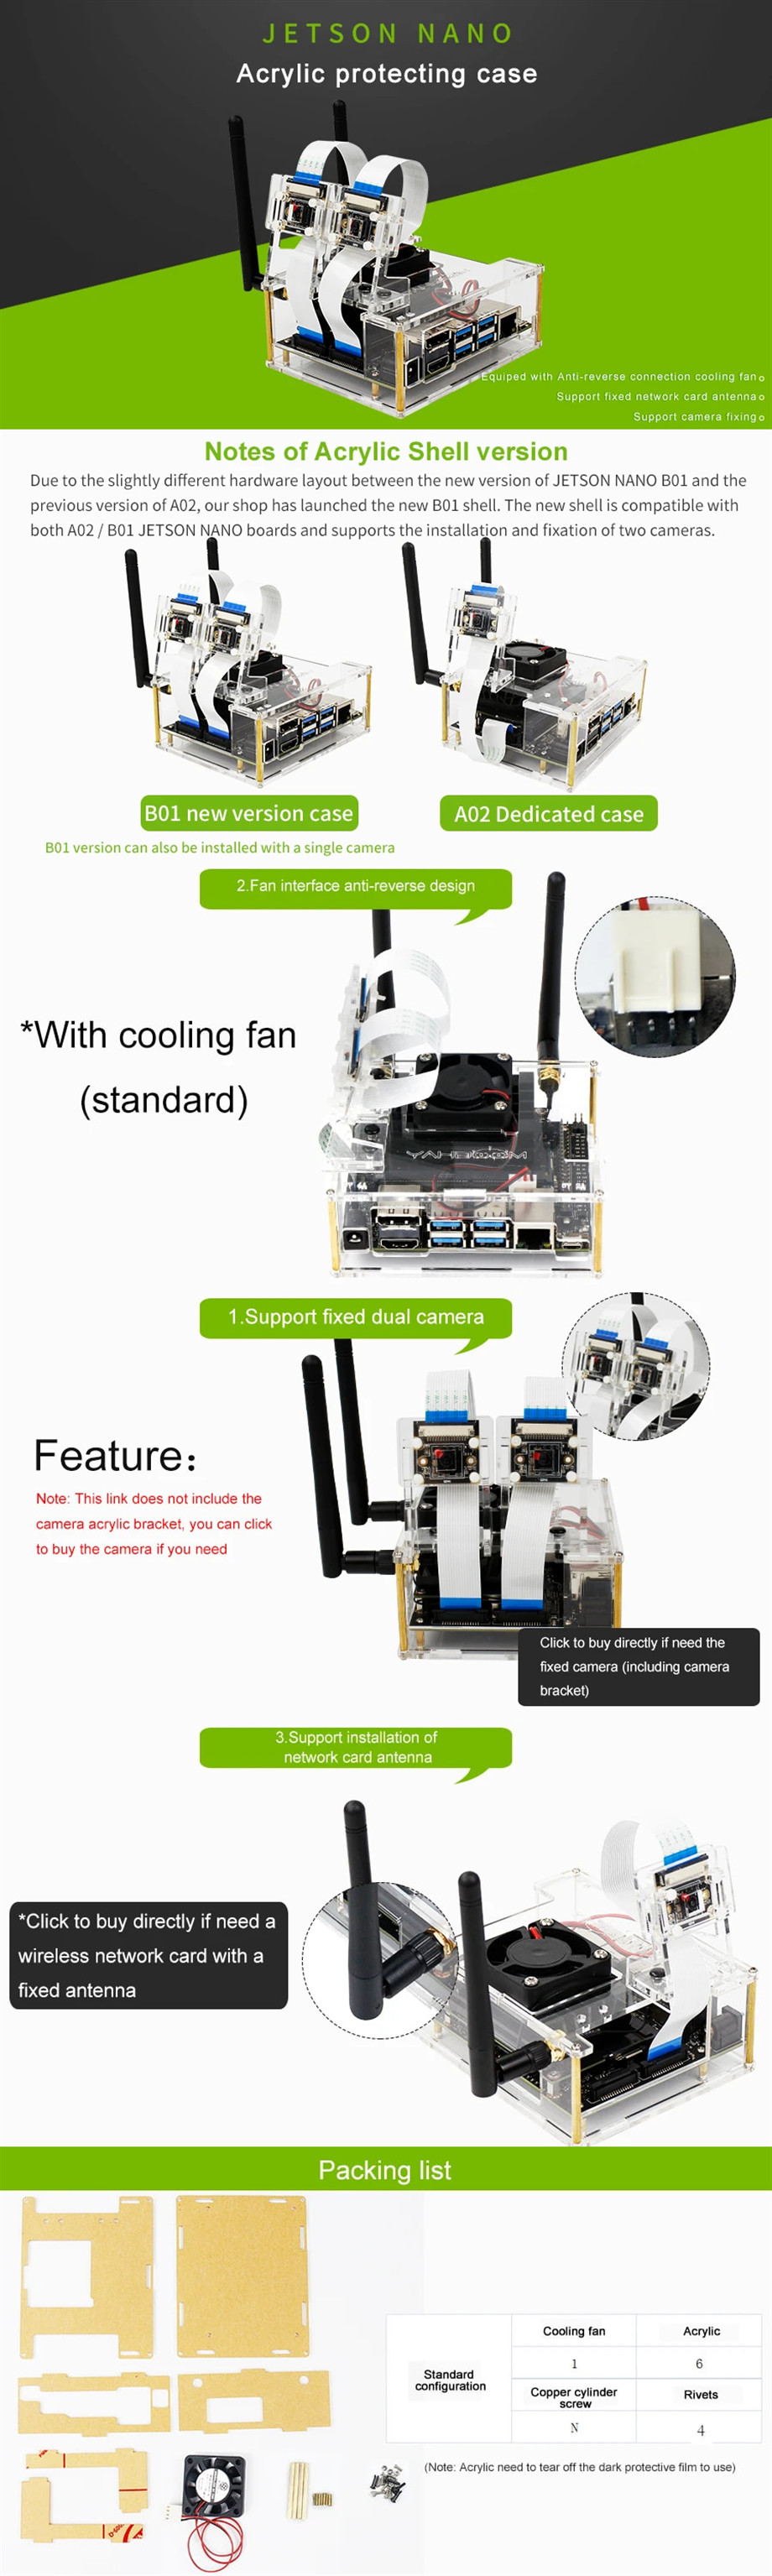 Yahboom-Jetson-Nano-Development-Board-Acrylic-NVIDIA-Protective-Case-With-Cooling-Fan-Compatible-B01-1656273-1